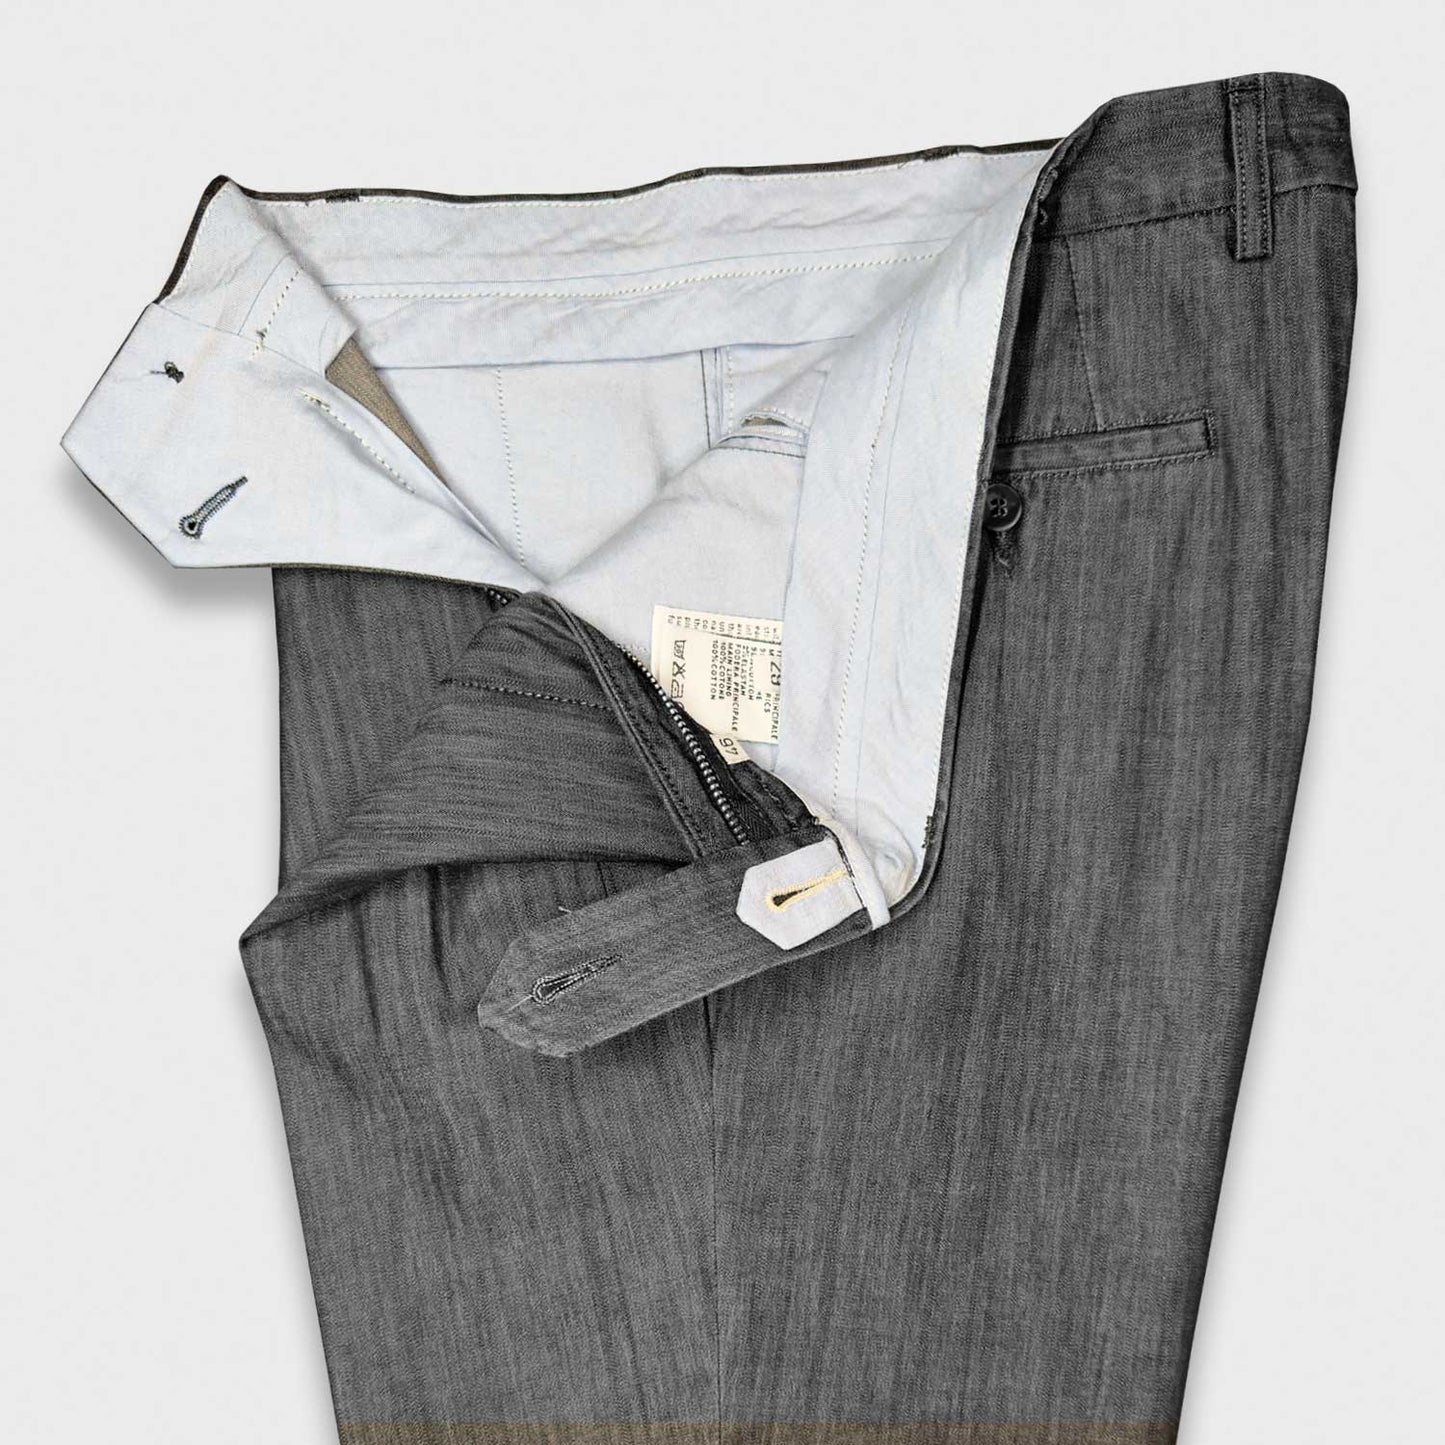 Black Tailored Trousers Kurabo Jeans Double Pleats. Men's pants with a classic cut made with a sporty fabric. Tailored jeans trousers Rotasport by Rota pantaloni, handmade in Italy with a soft and refined Japanese Kurabo denim fabric, flamed black color, double pleats, button and zip closure.